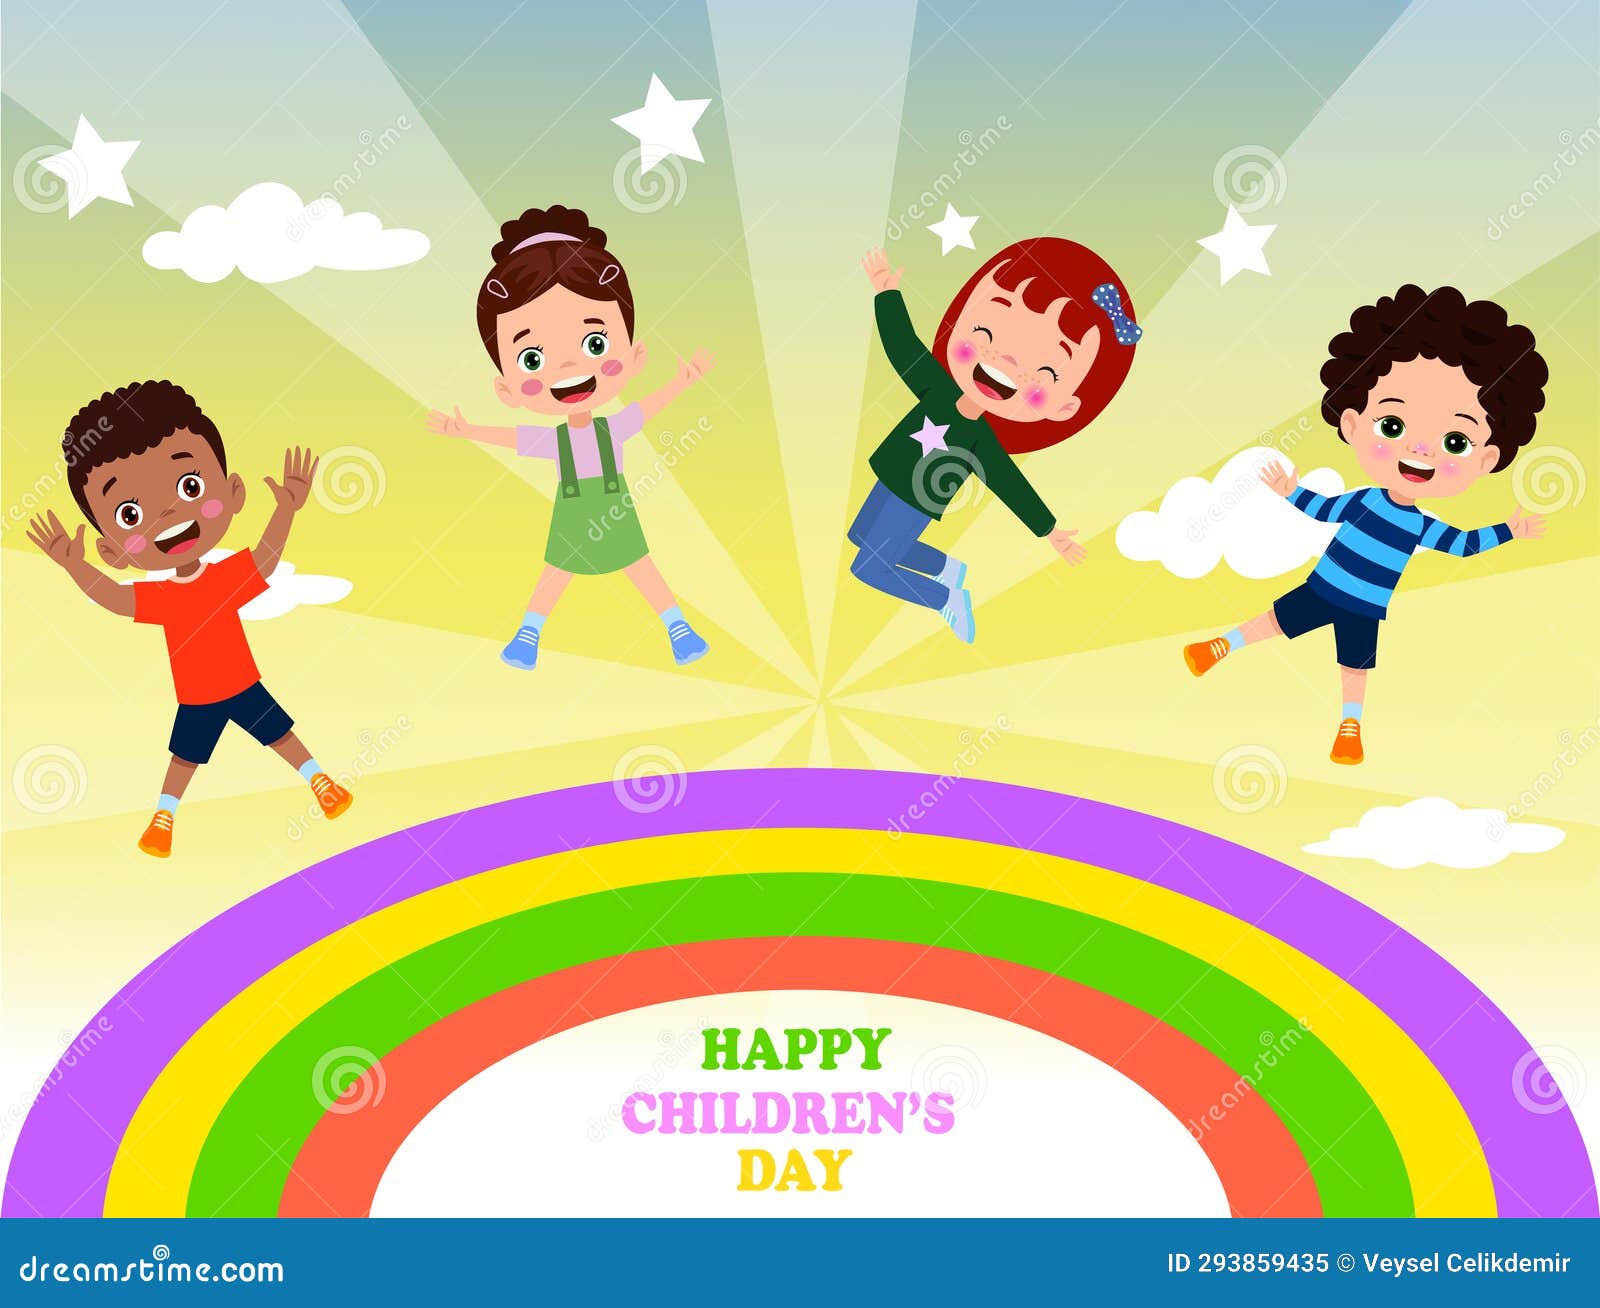 a poster for the children's day with the words happy children's day